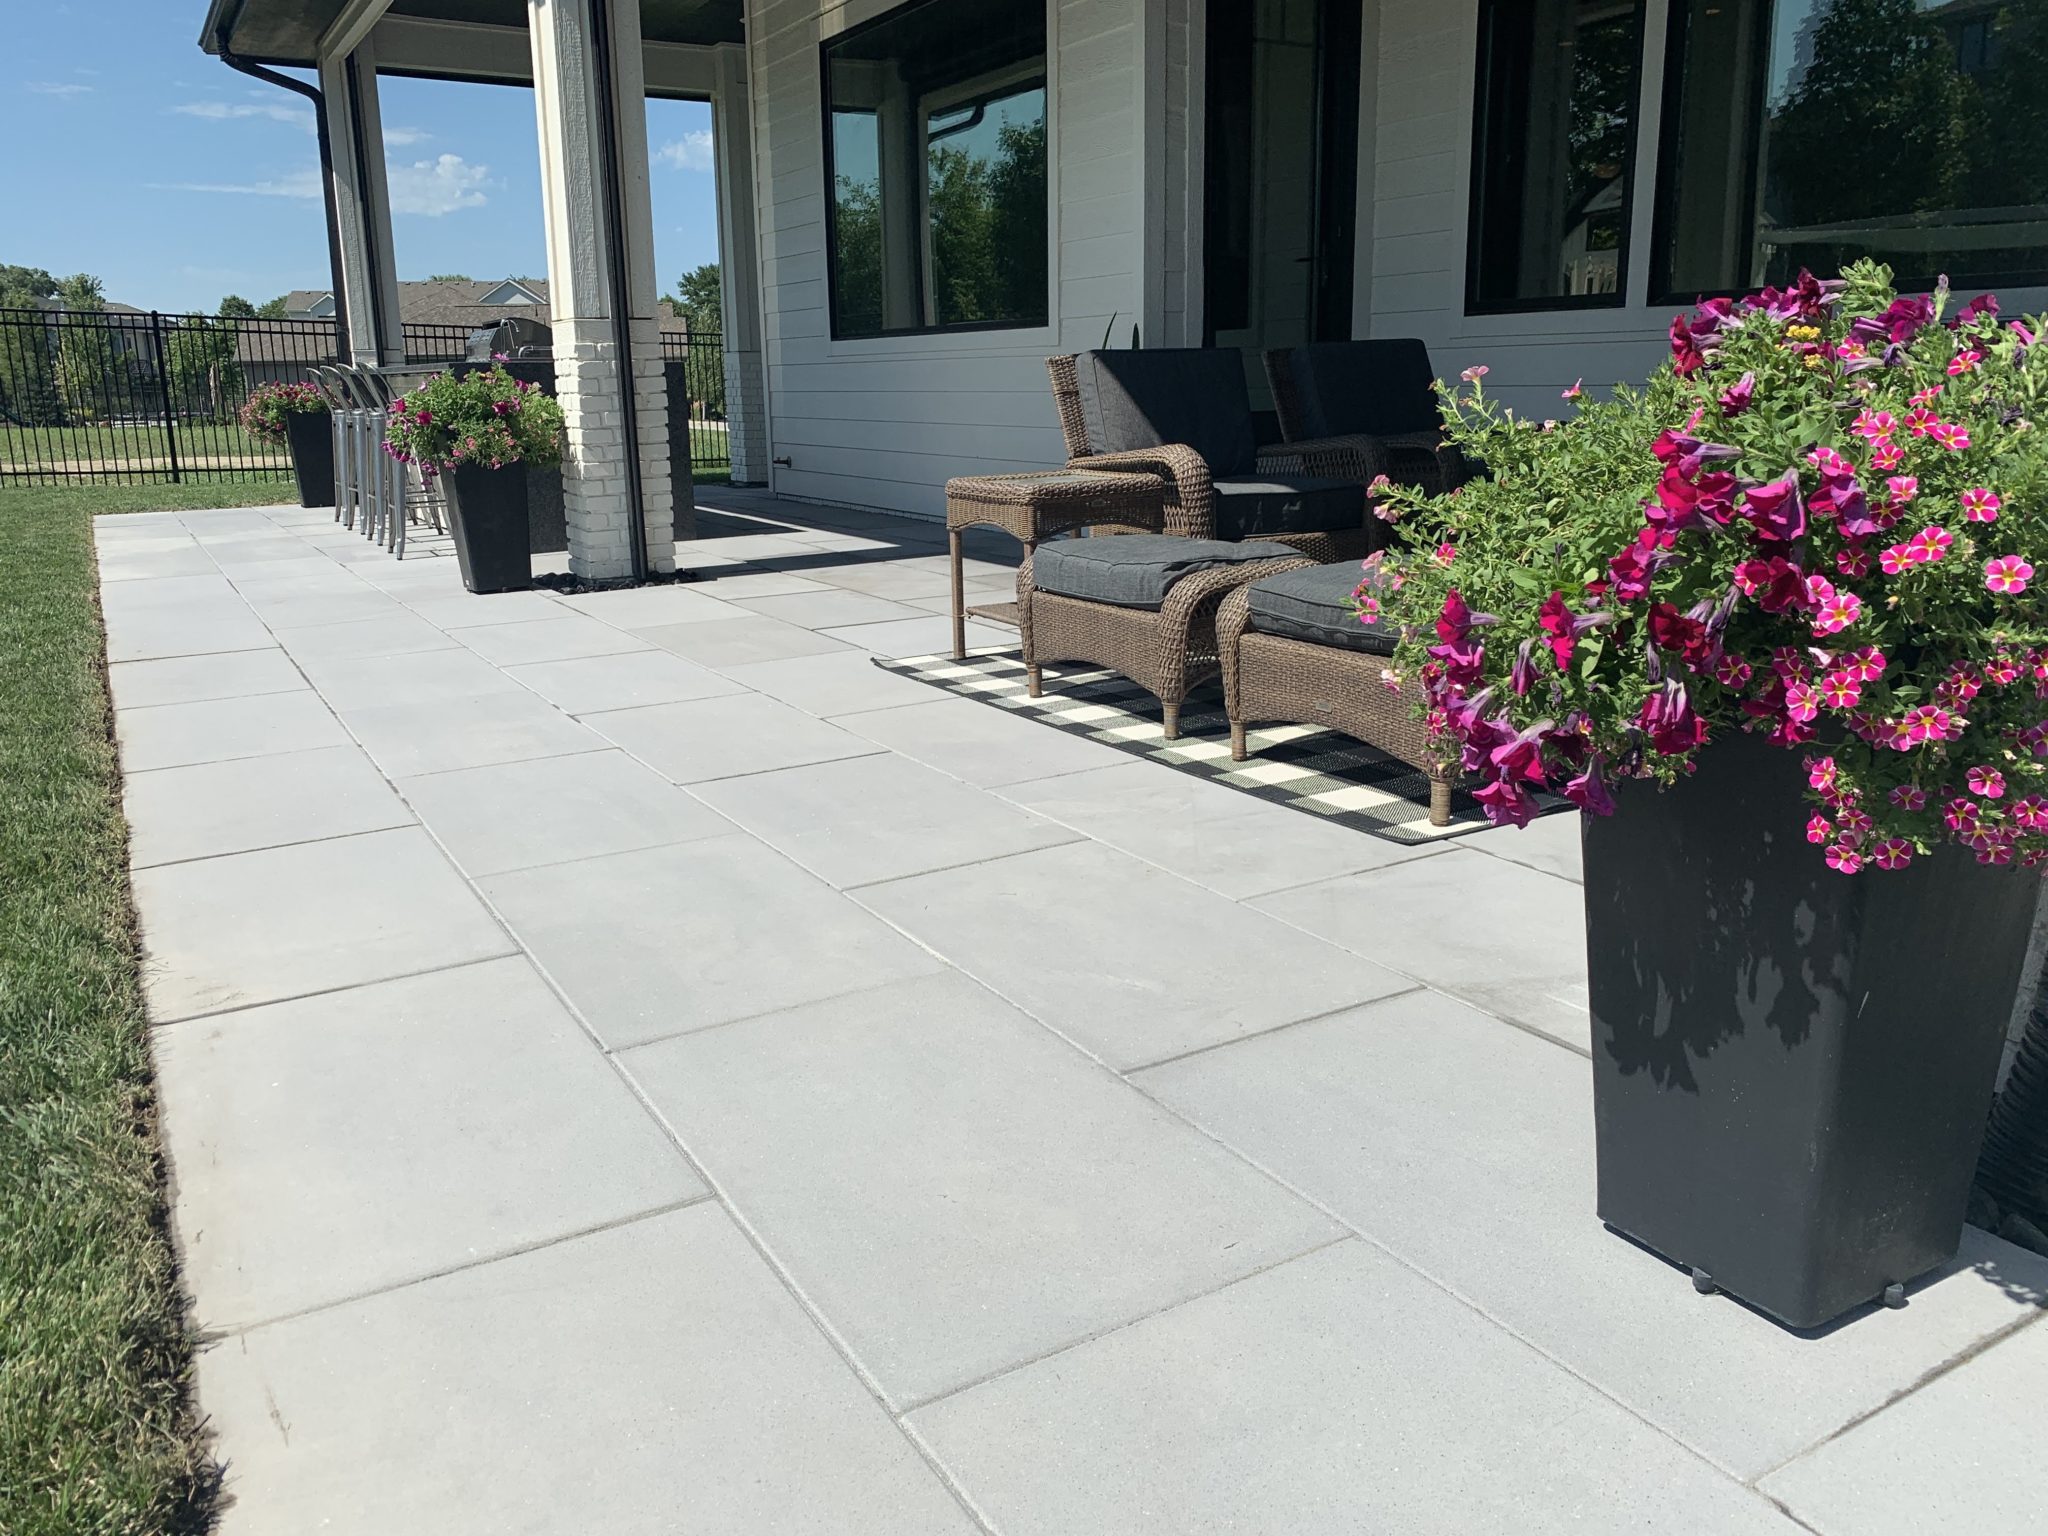 Paver Patio Trends in 2022